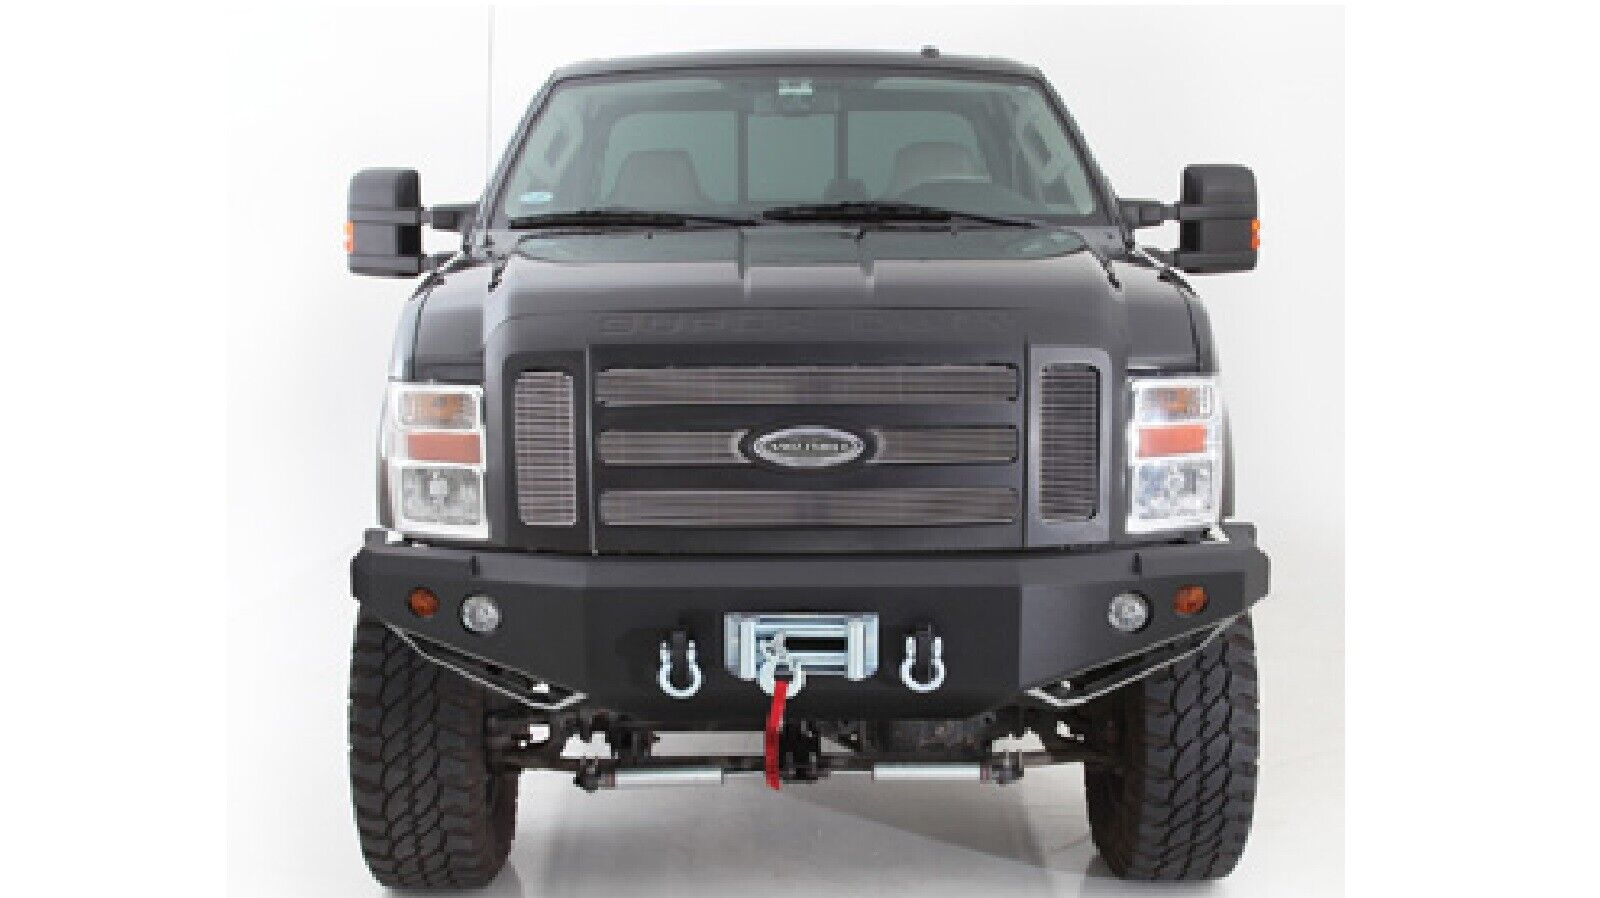 Smittybilt 612850 Black M1 Front Bumper with Winch Mount for Toyota FJ Cruiser